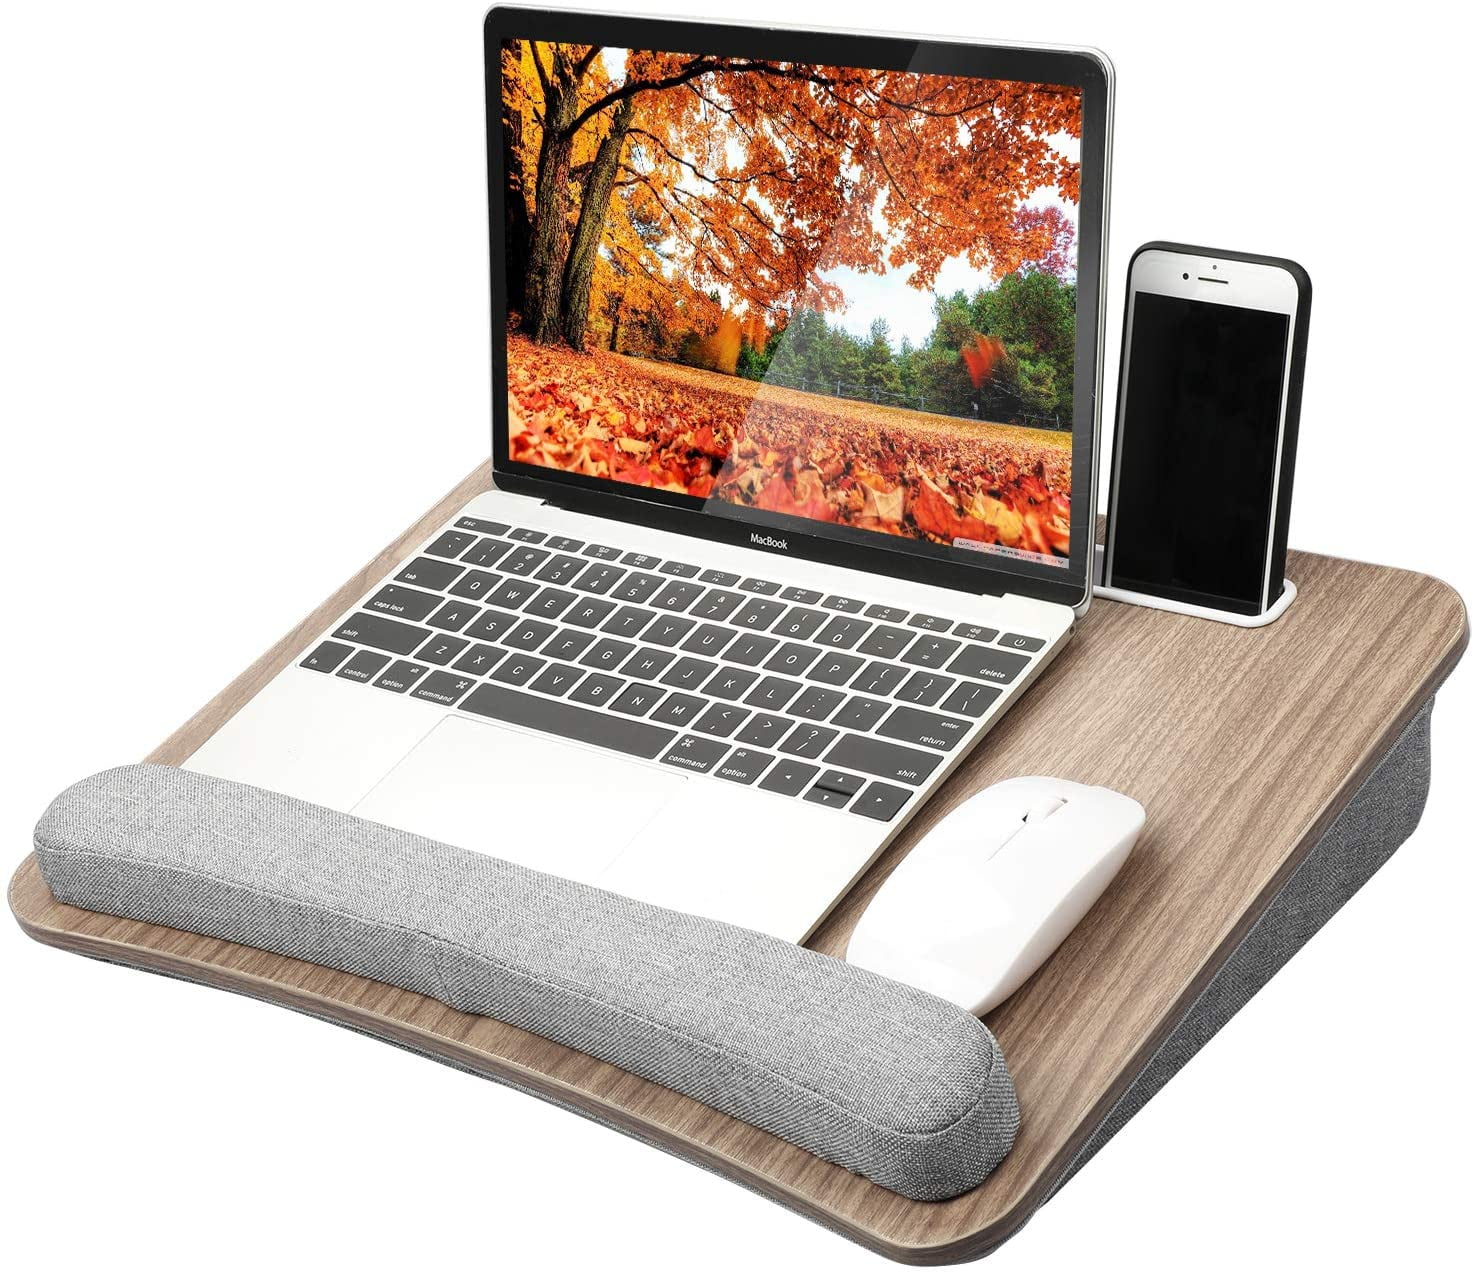  Lap  Laptop  Desk  with Pillow Cushion Fits up to 15 6 inch 